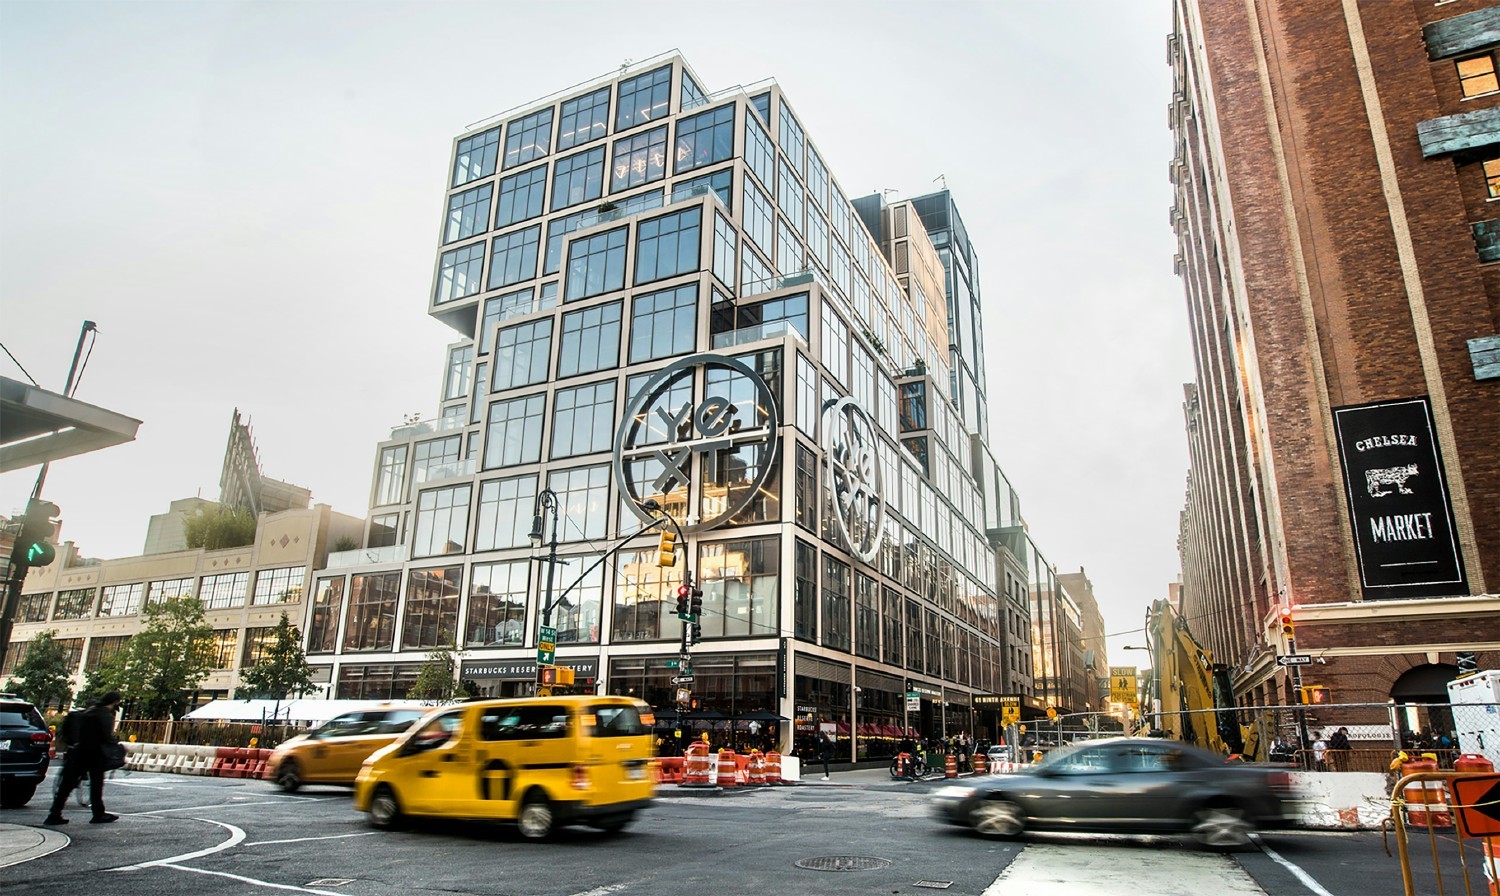 Yext’s HQ is in Chelsea, an iconic Manhattan neighborhood. The office is steps away from famous NYC shops & restaurants.